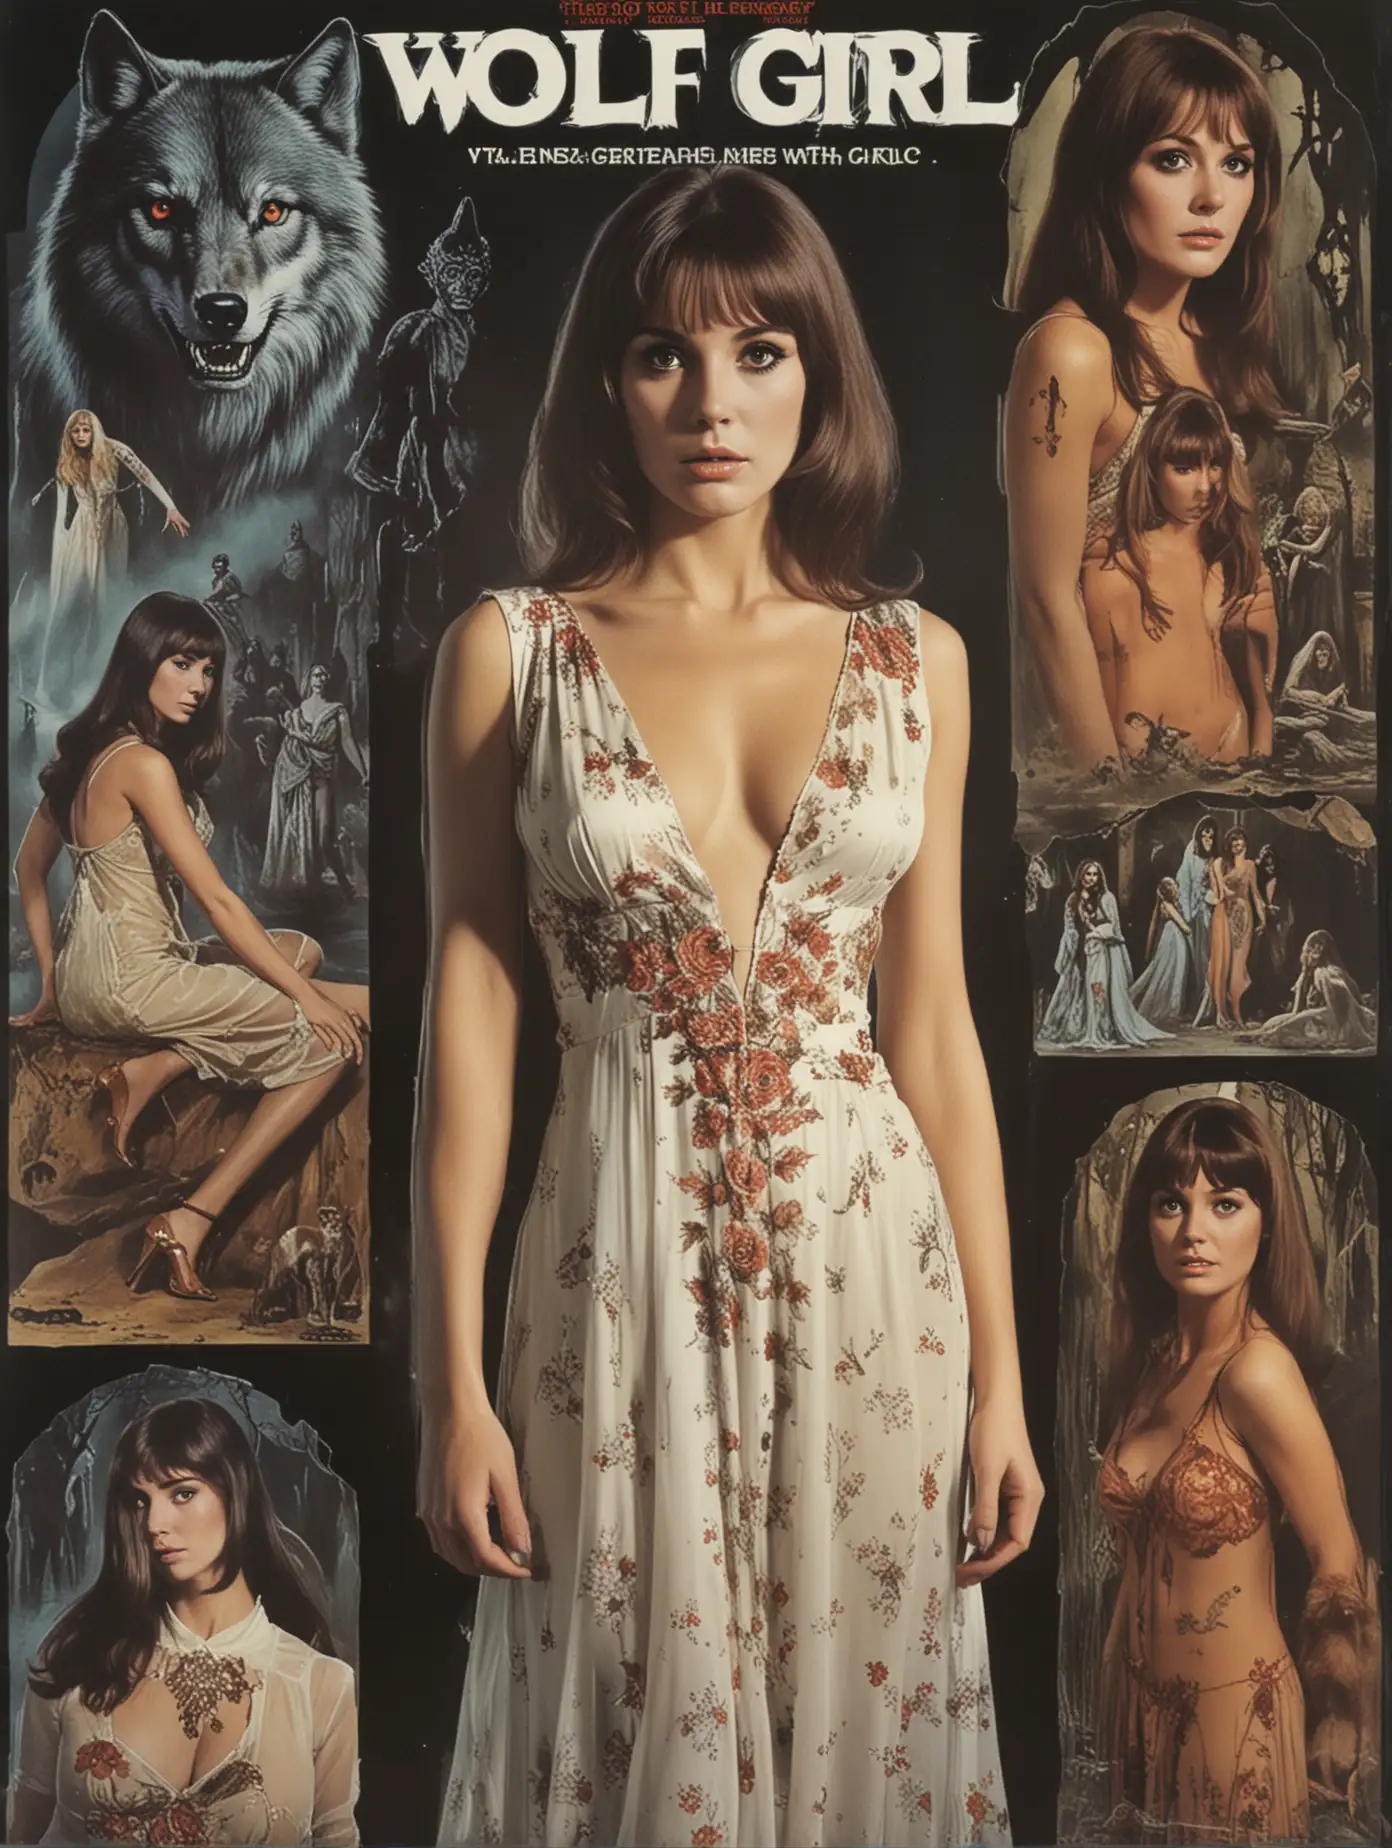 Vintage British Horror Film Poster Wolf Girl Featuring Christopher Lee and Sensual Characters